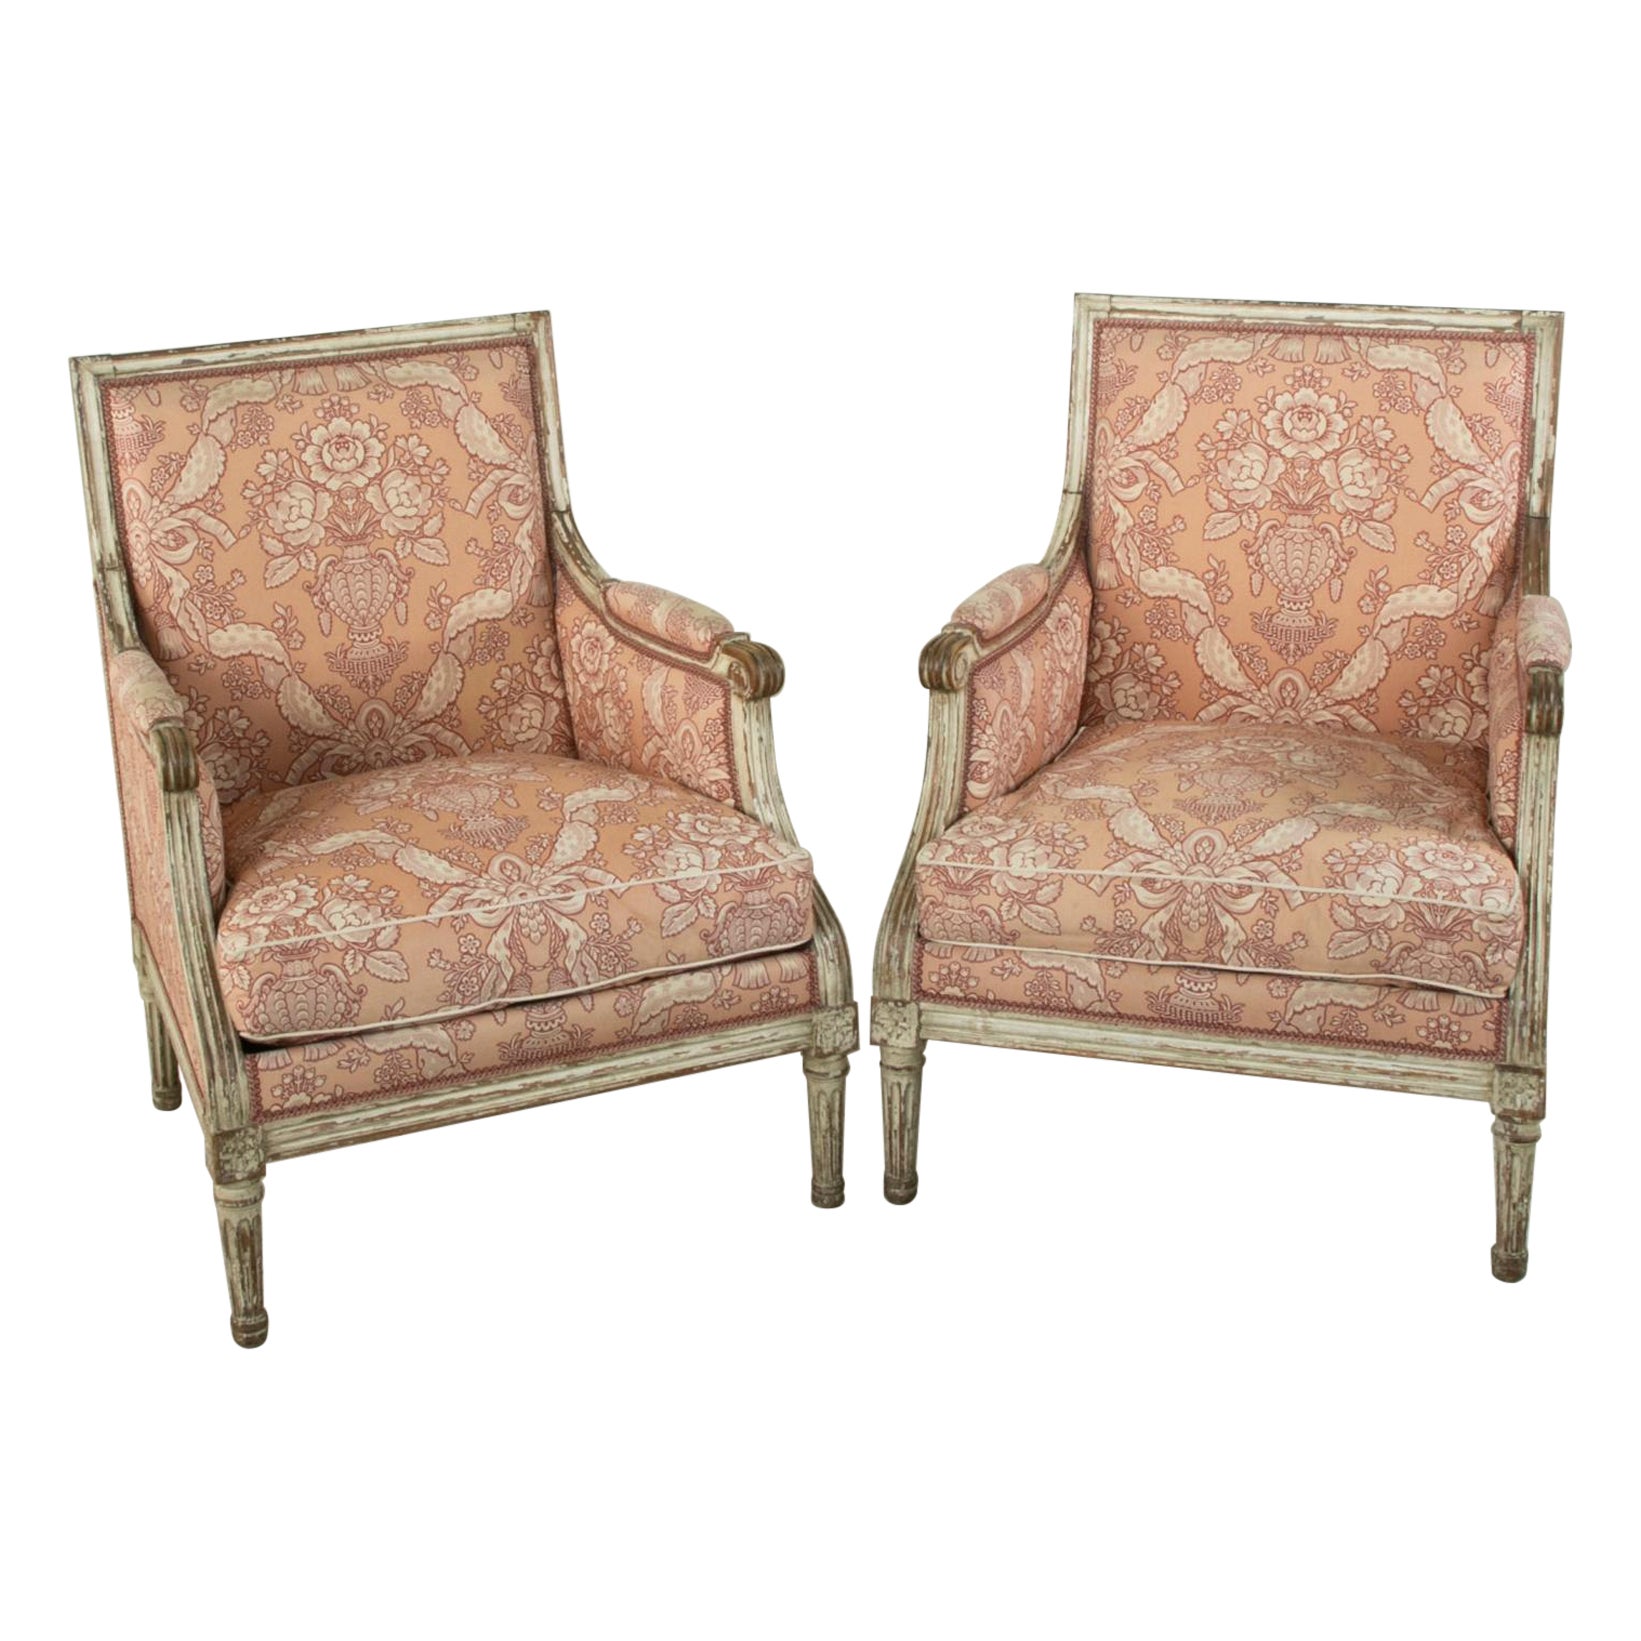 Pair of Mid-Twentieth Century French Louis XVI Style Painted Armchairs, Bergeres